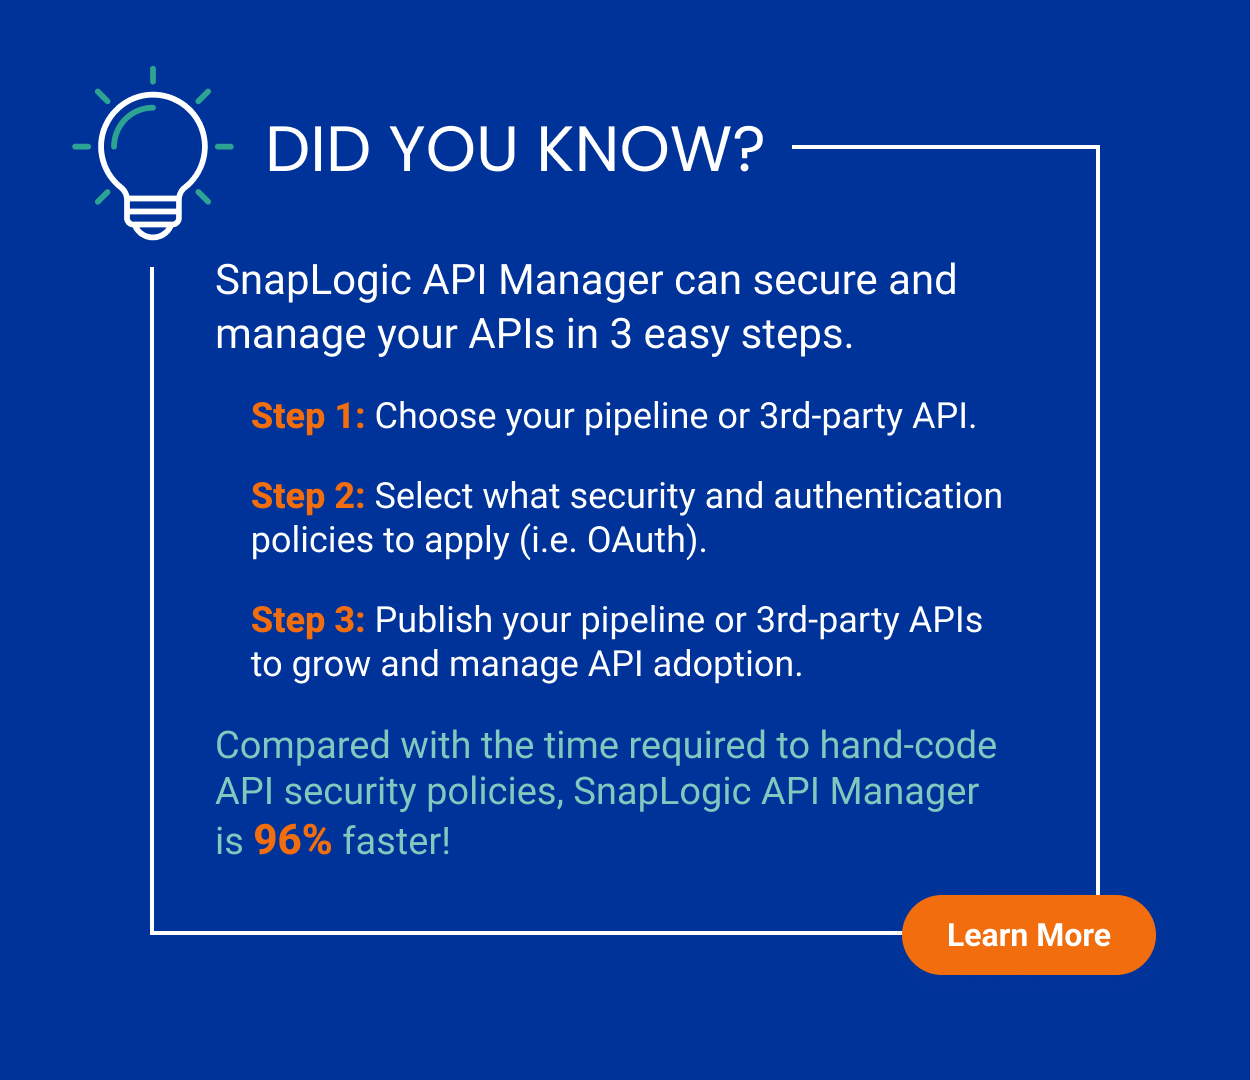 SnapLogic API Management can be managed in 3 easy steps